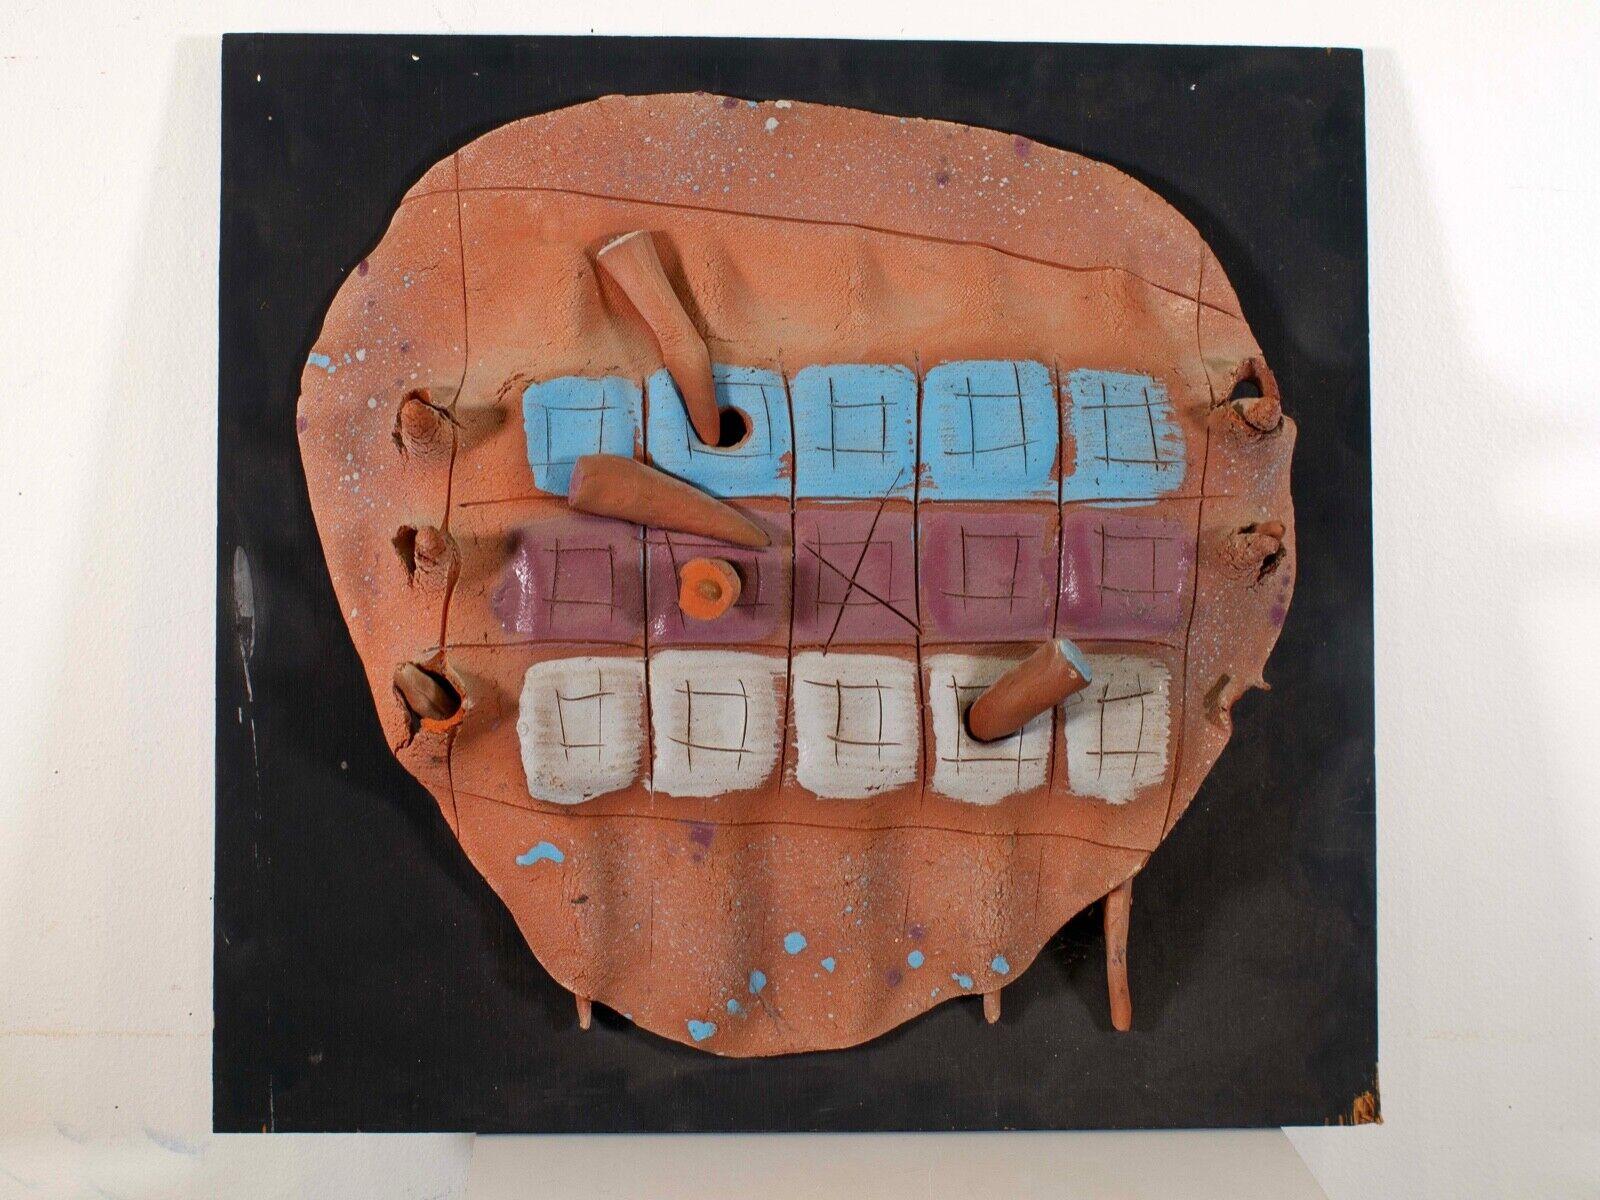 An eclectic modernist contemporary ceramic studio art sculpture on board titled “Kathy’s Game” by Detroit artist Albert Young. Terracotta ceramic piece with hand painted details in blue, purple, and white. There is a tribal or native-like quality to